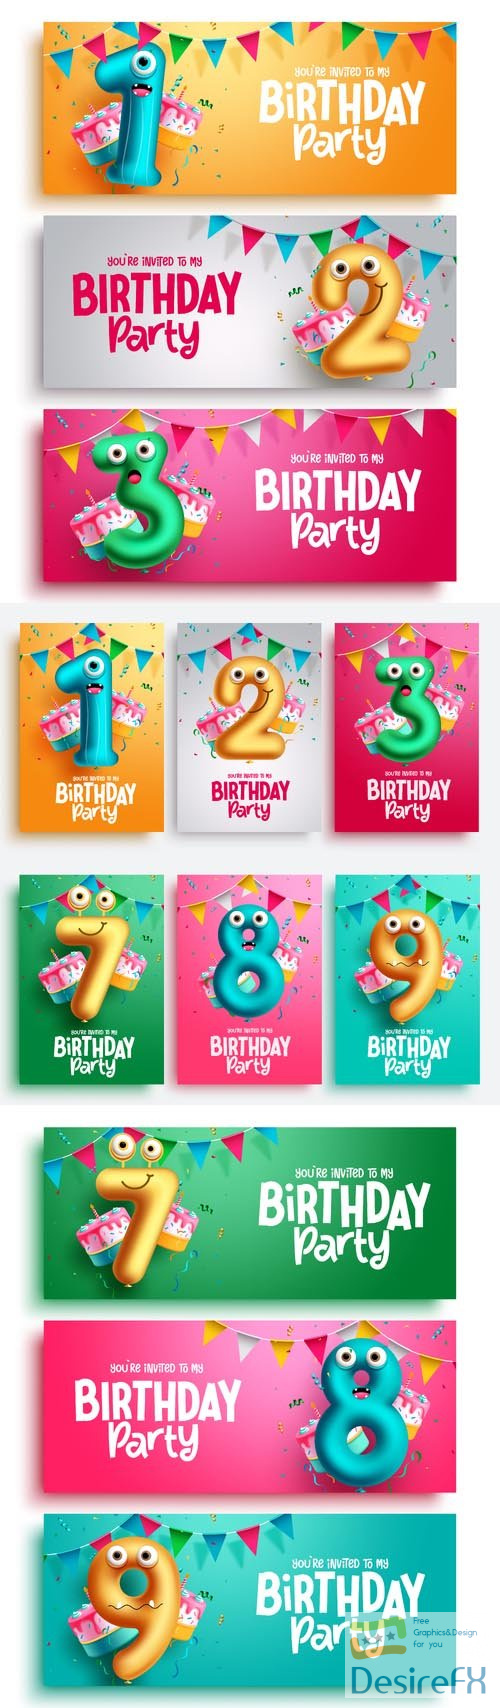 Birthday party vector set design, character balloons in number balloon collection